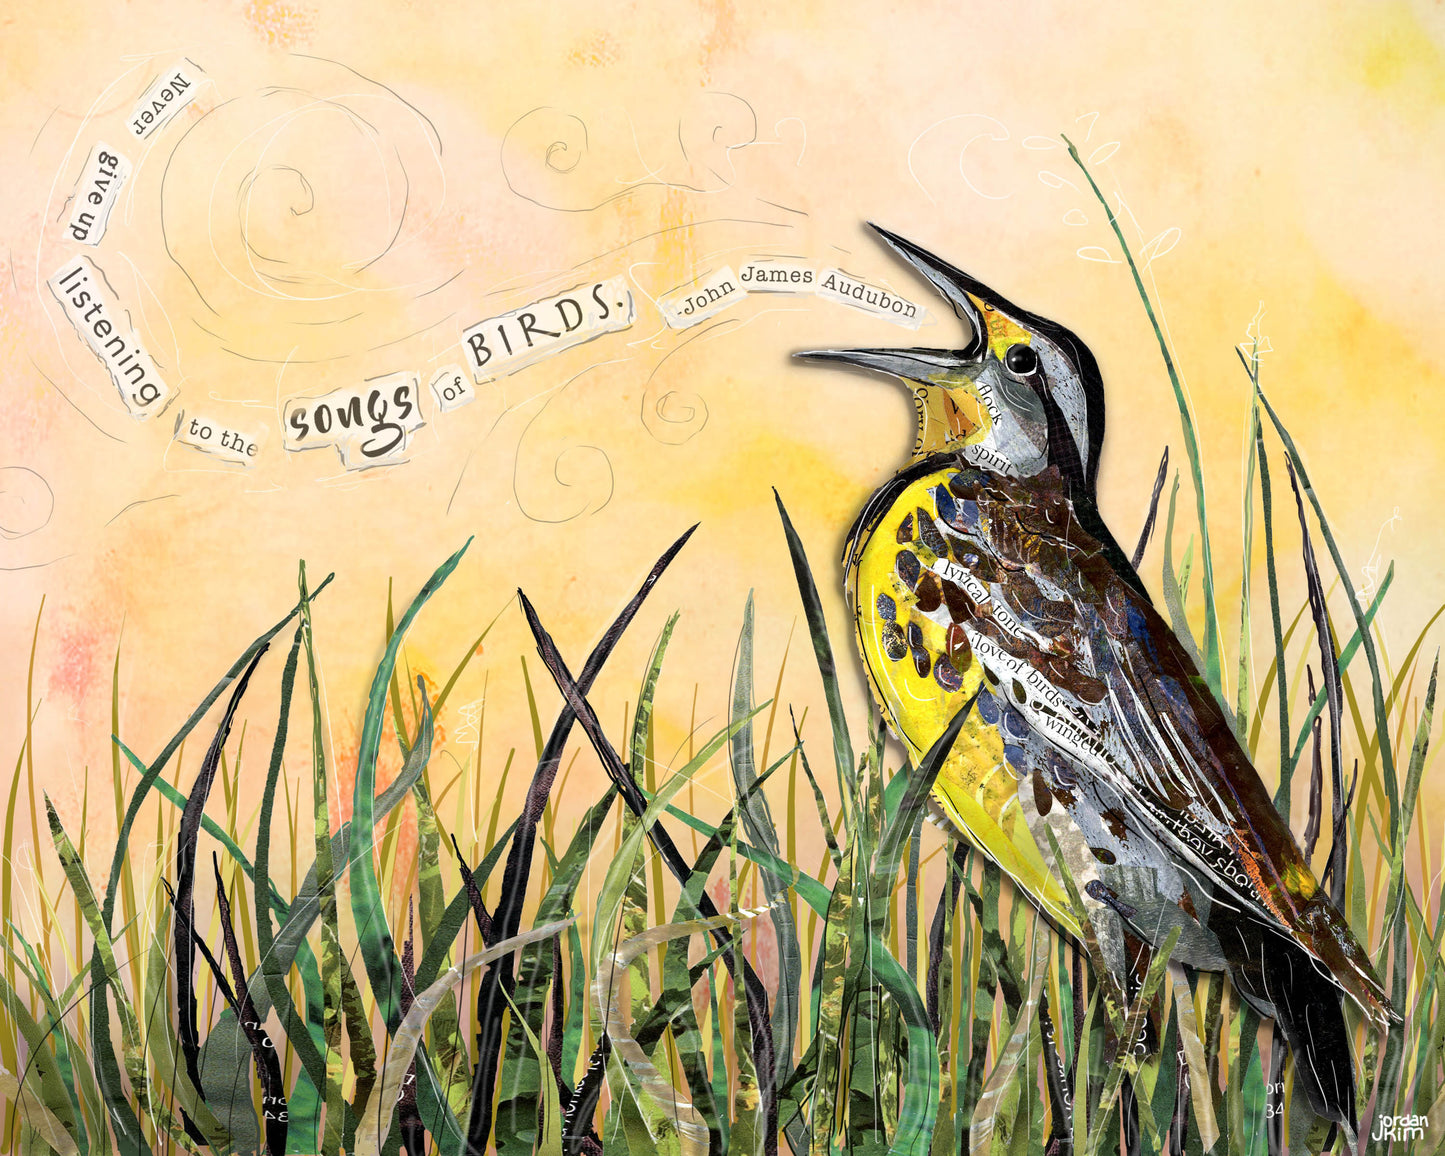 Greeting Card of mixed media collage of a Western Meadowlark singing out in the grass with a John James Audubon quote - Blank Inside